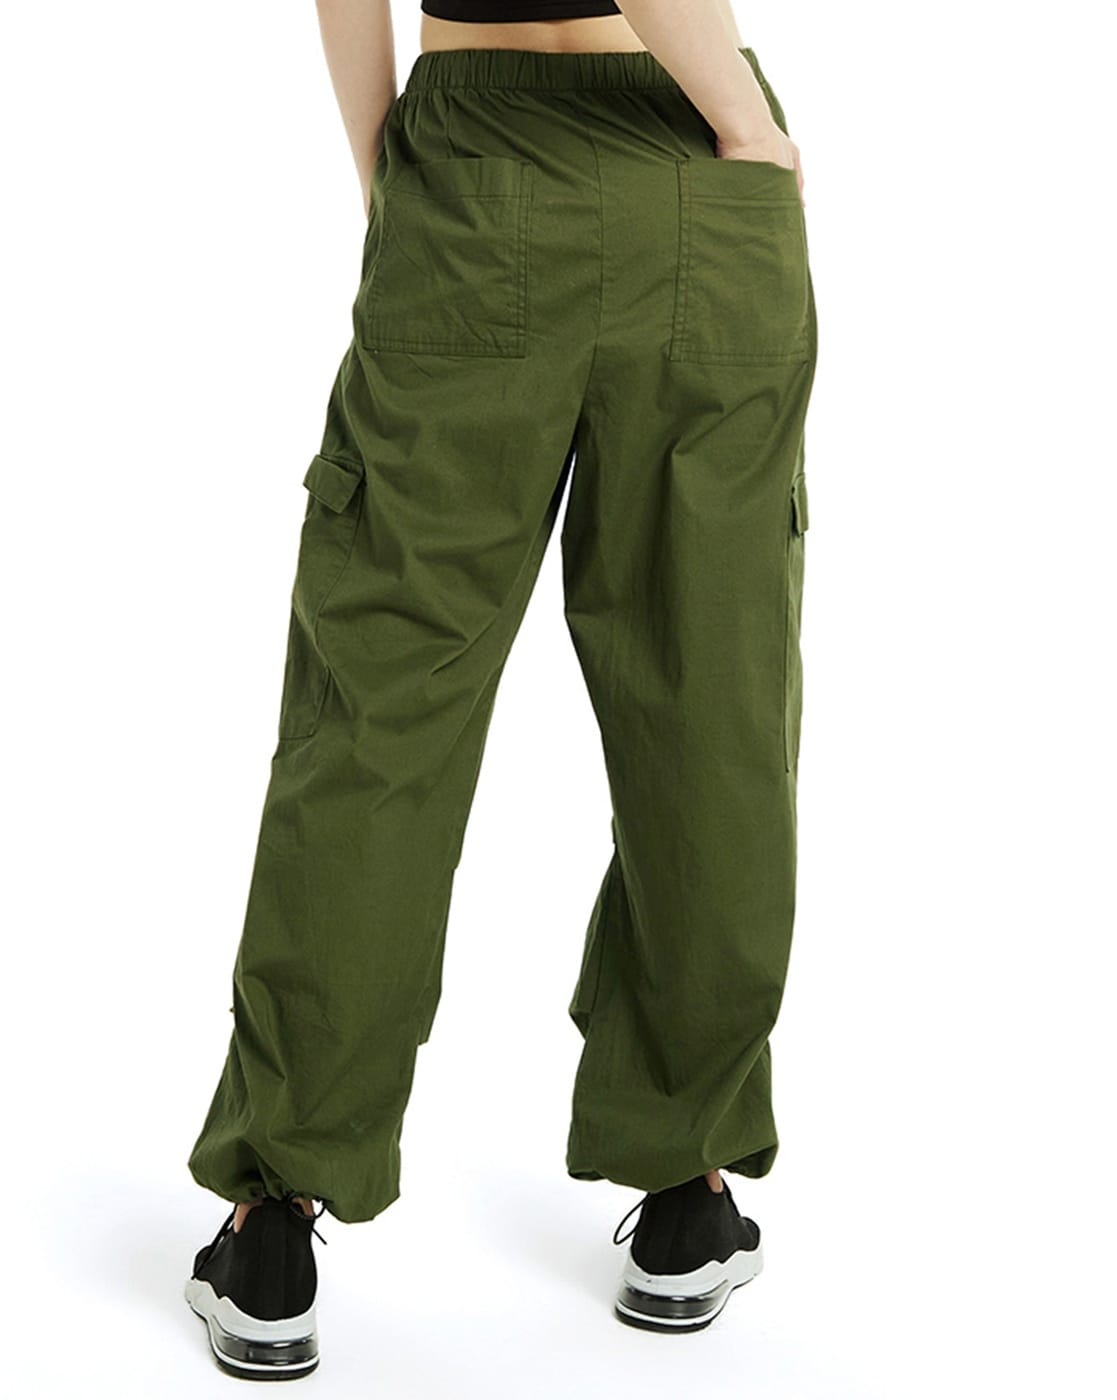 Buy Cargo Pants Women High Waist, Baggy Cargo Jeans with Pocket Baggy  Jogger Relaxed Y2K Pants Fashion Jeans, 314 Khaki, M at Amazon.in